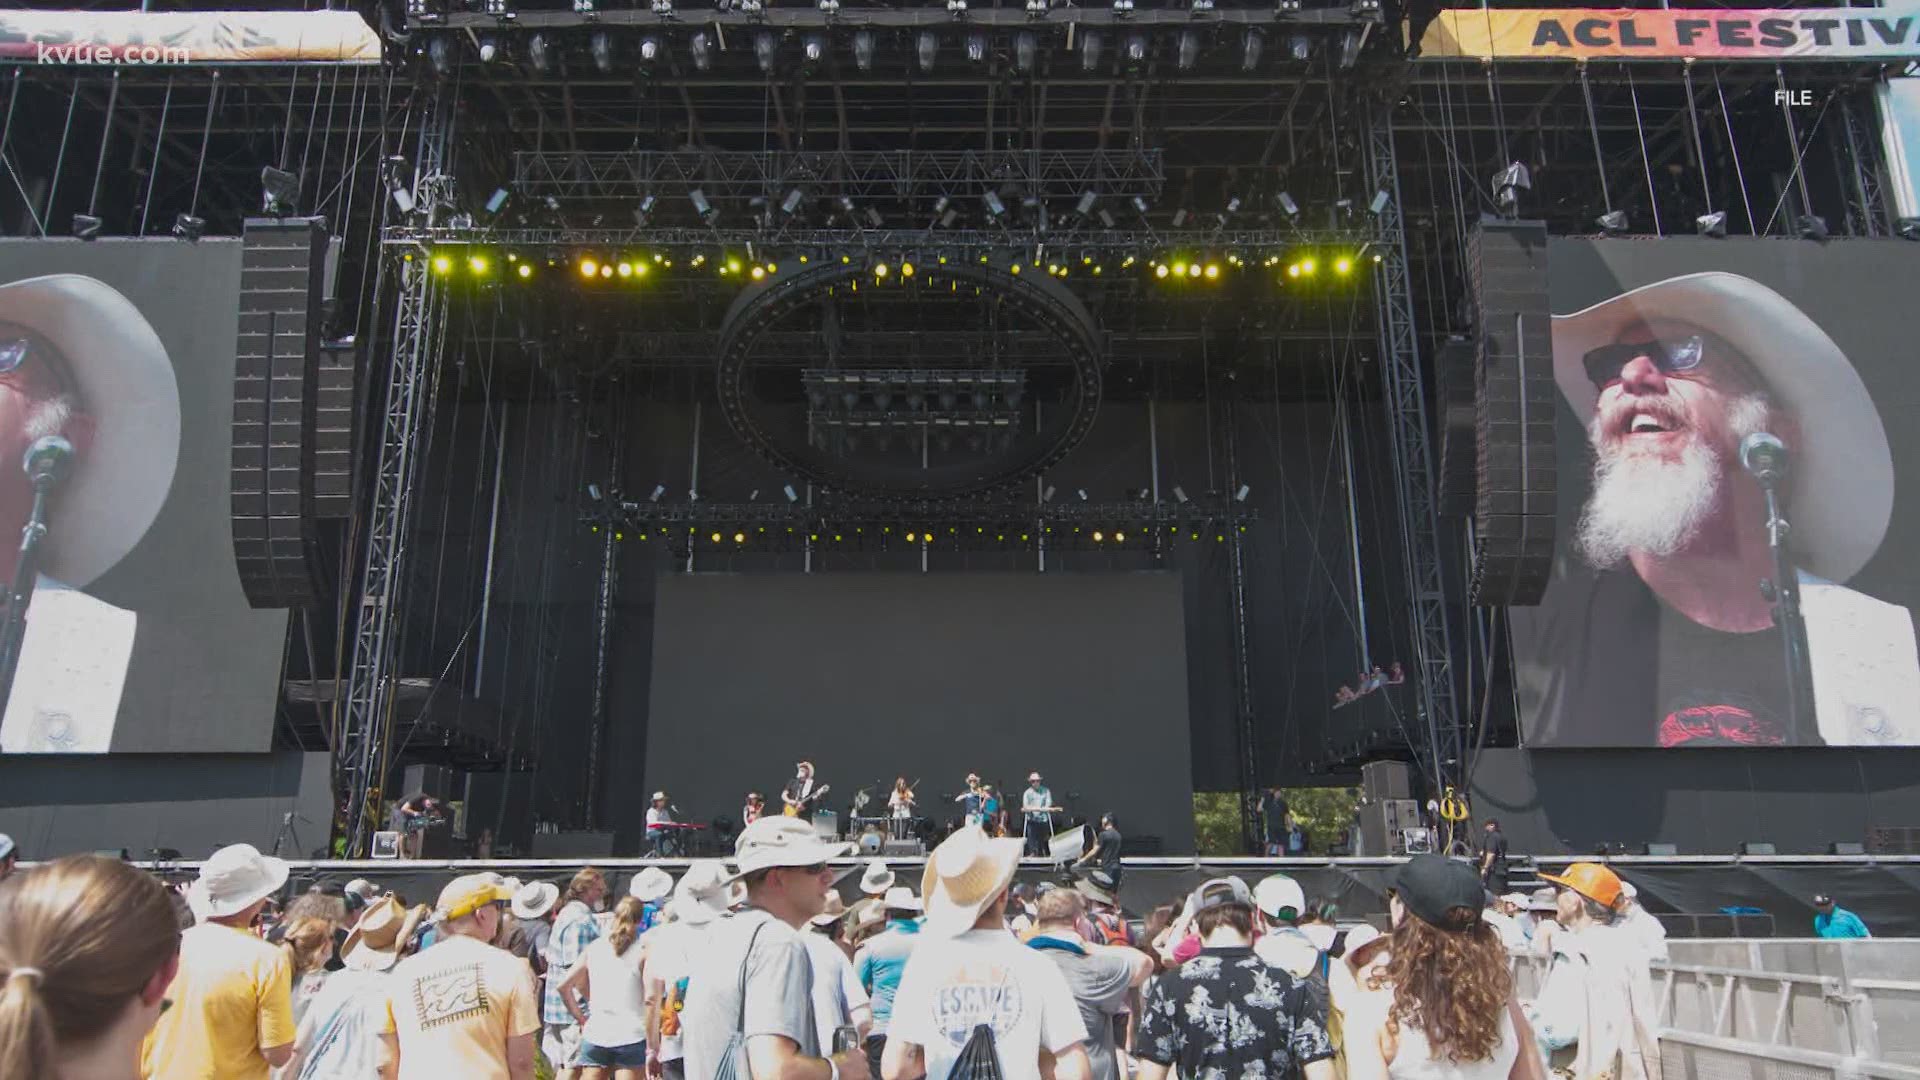 There's hope for this year's Austin City Limits music festival.